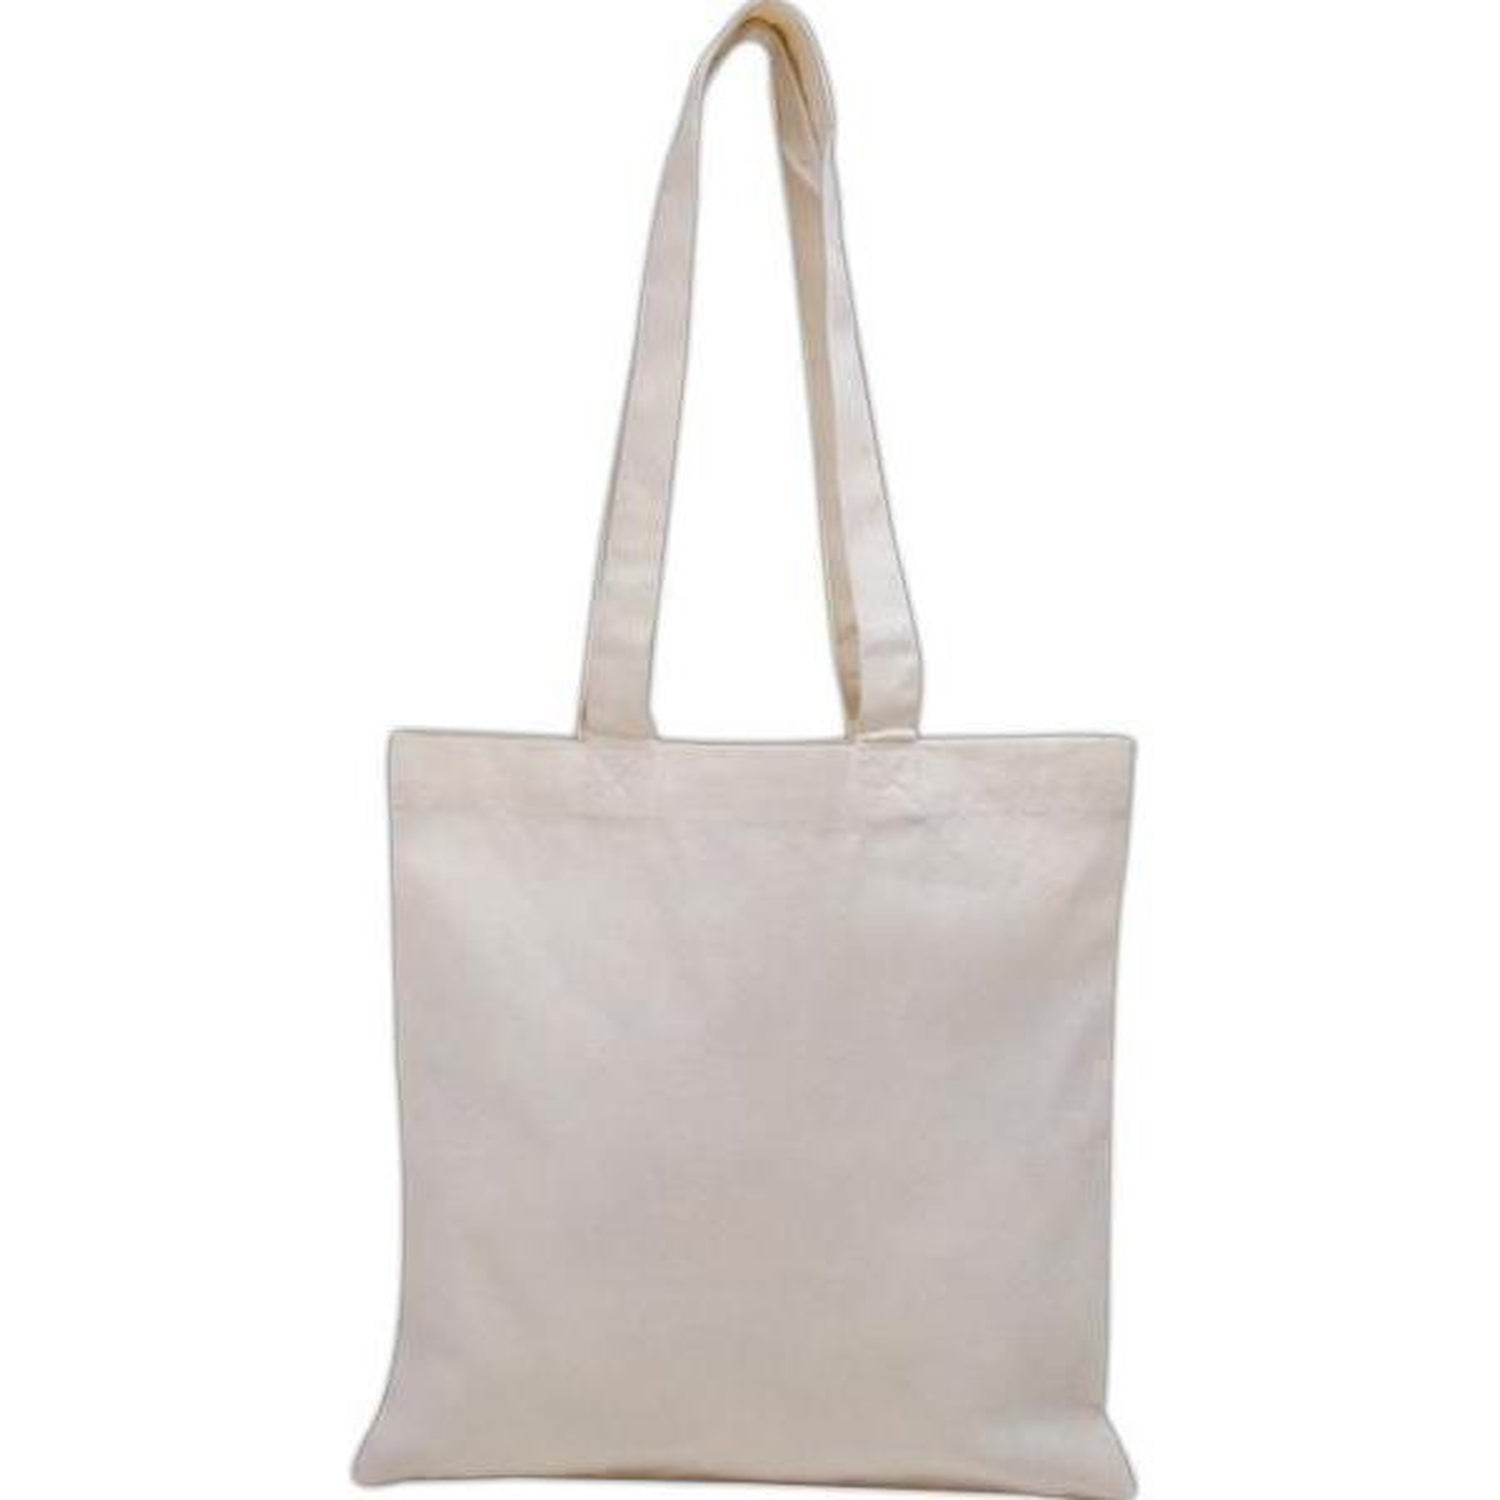 Basic Cotton Tote Bags Bulk with Over the Shoulder Handles - TB100L ...